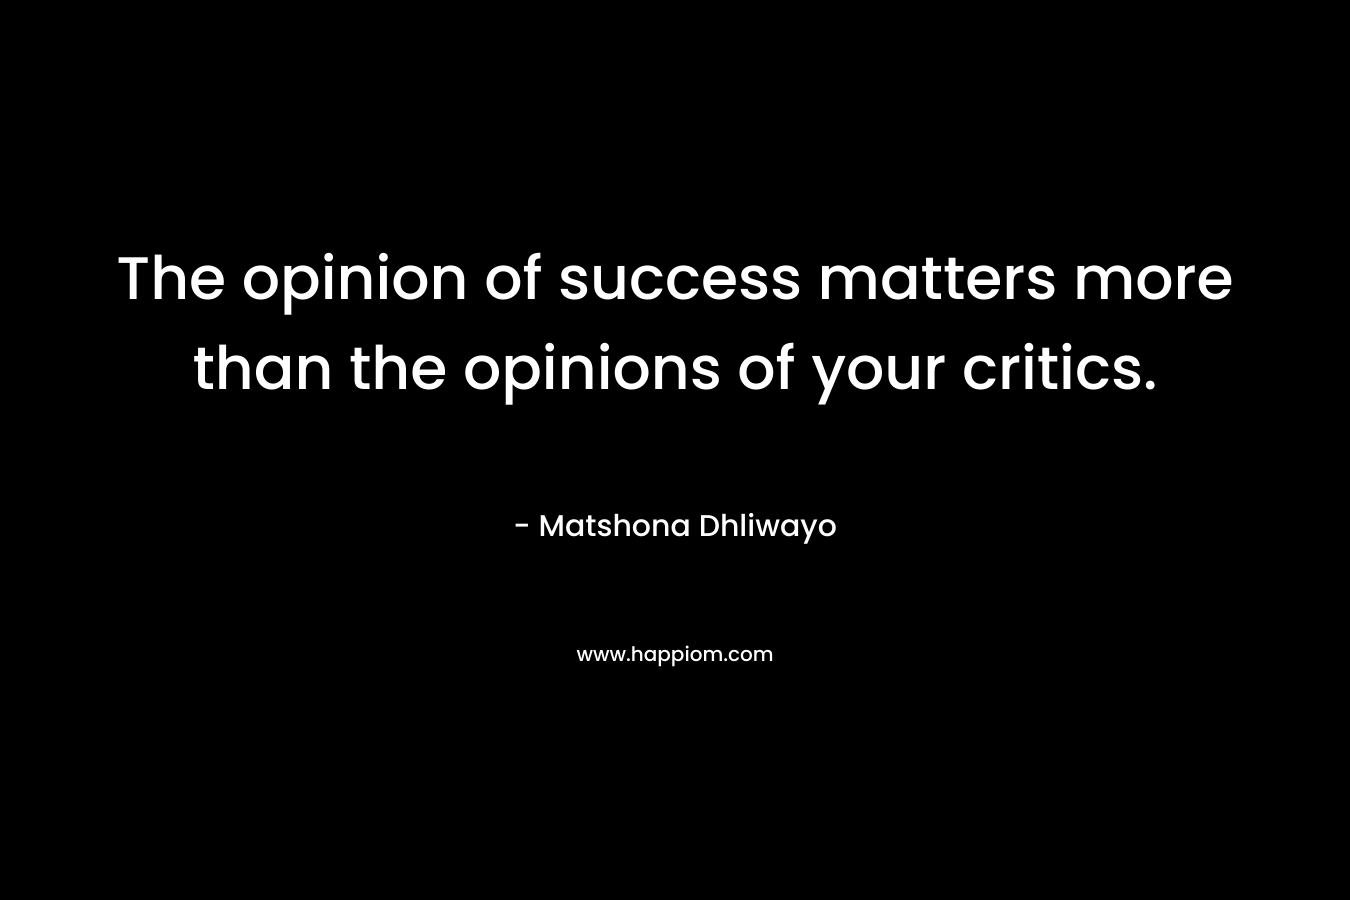 The opinion of success matters more than the opinions of your critics.